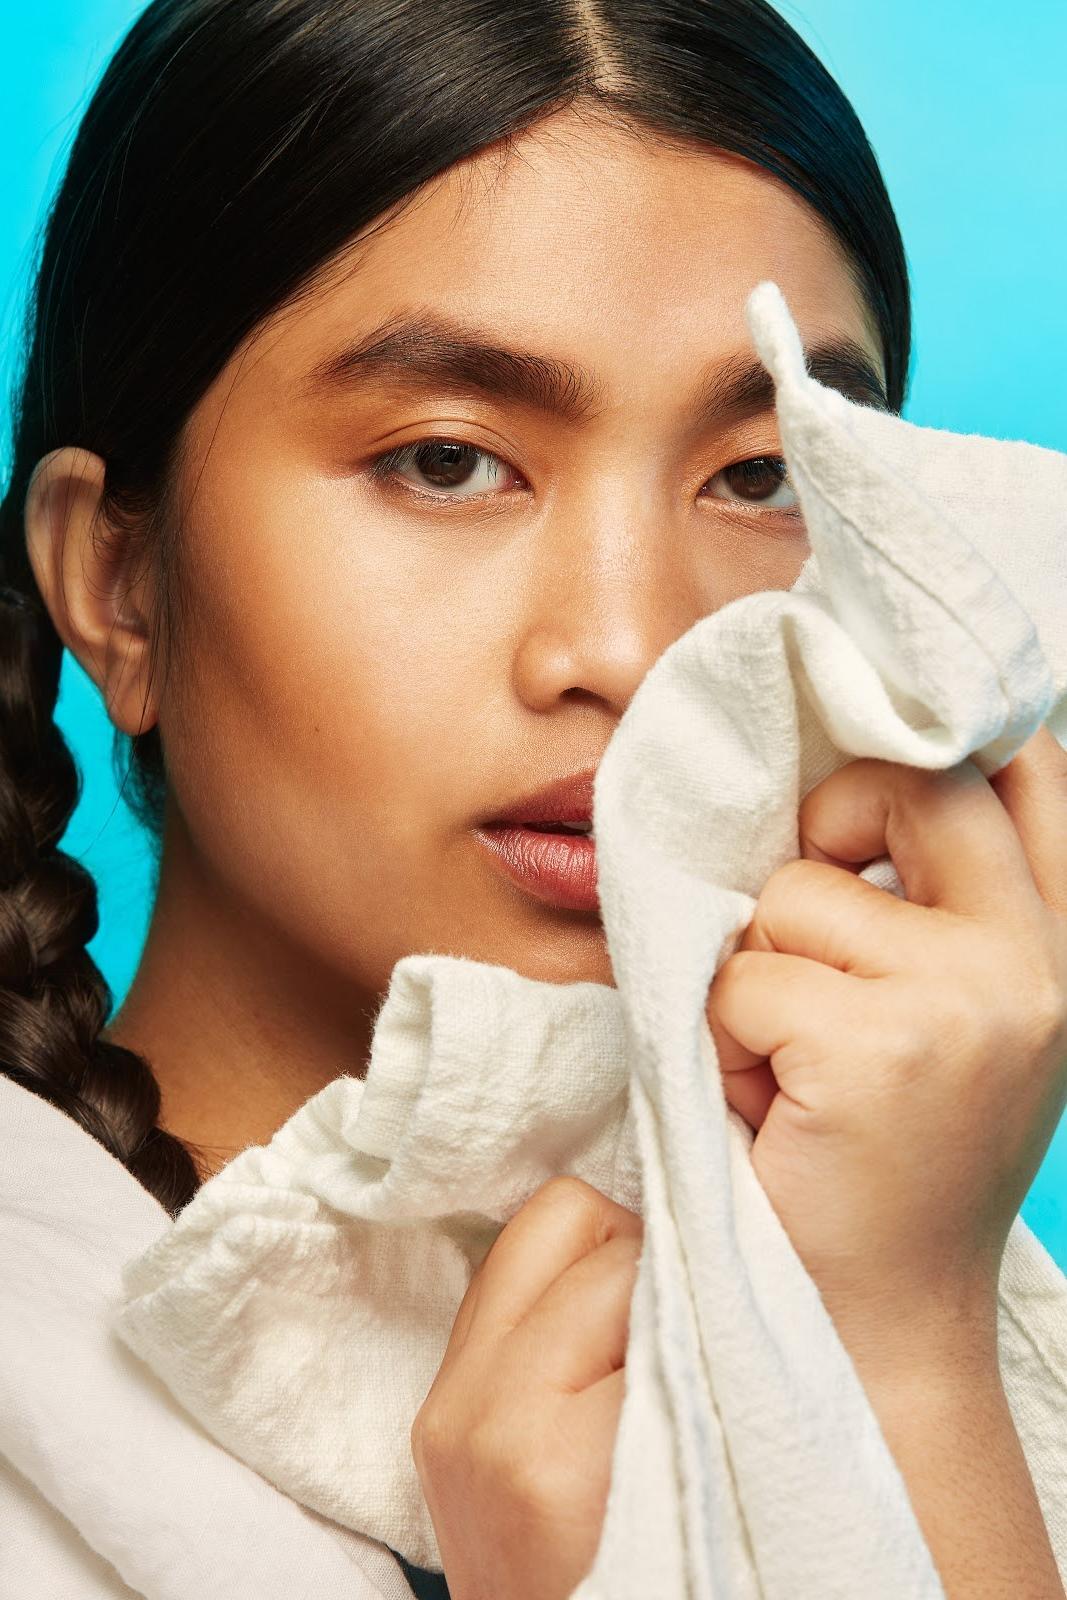 Woman Holding Clean Laundry To Face